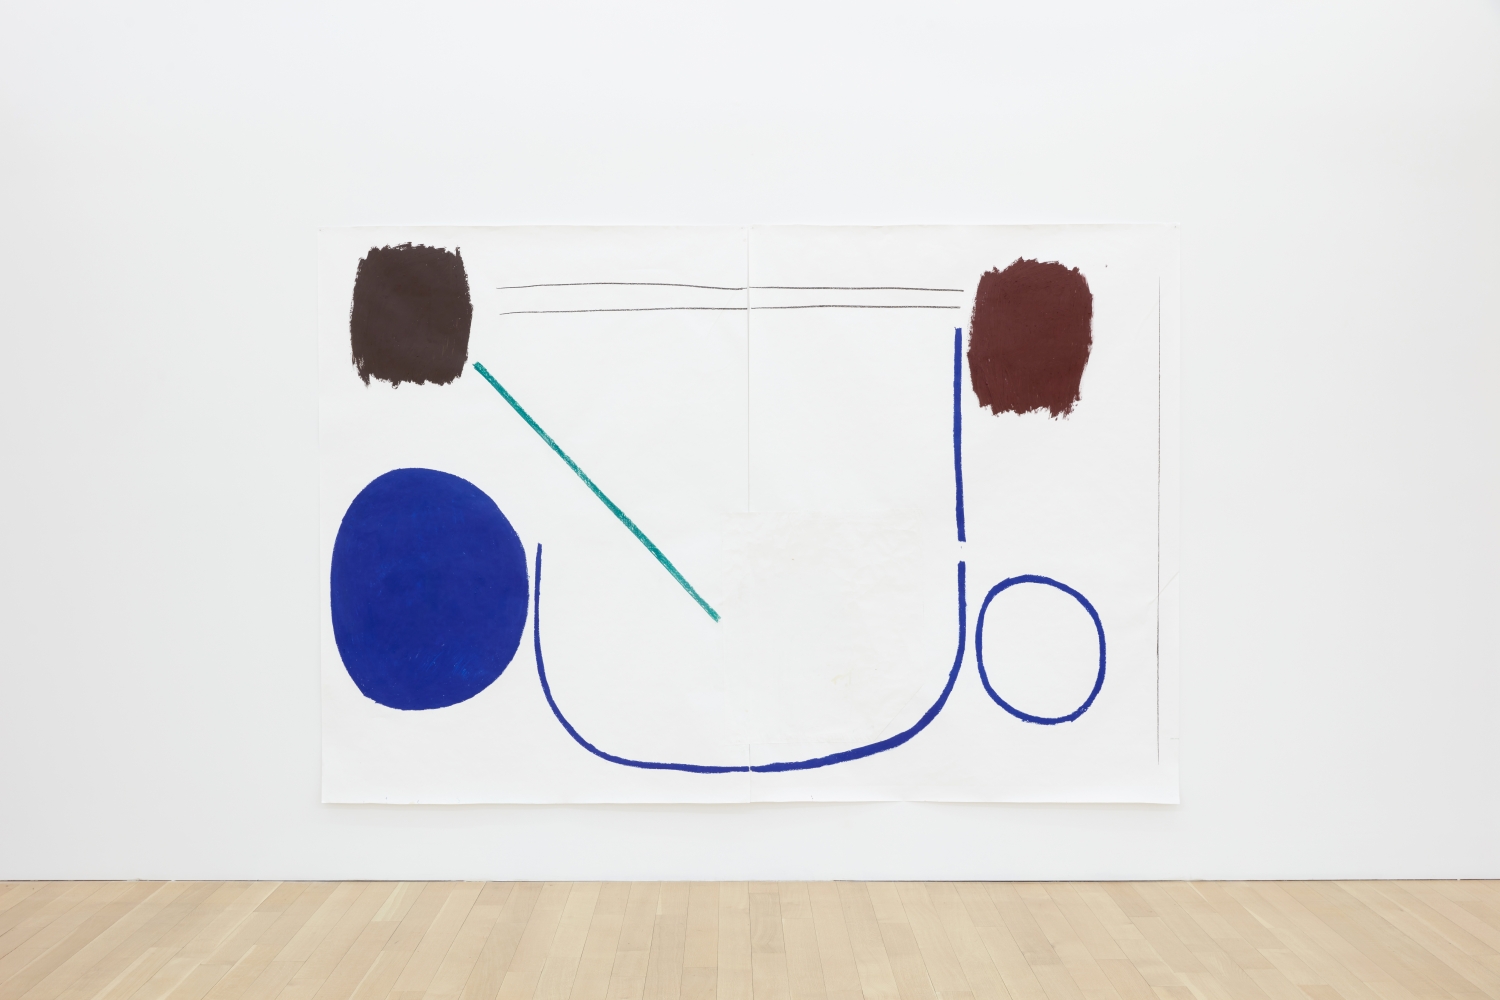 Esther Kläs WAYS, 2021 oilstick and pastel on paper 78 3/4 x 118 7/8 inches (200 x 302 cm)